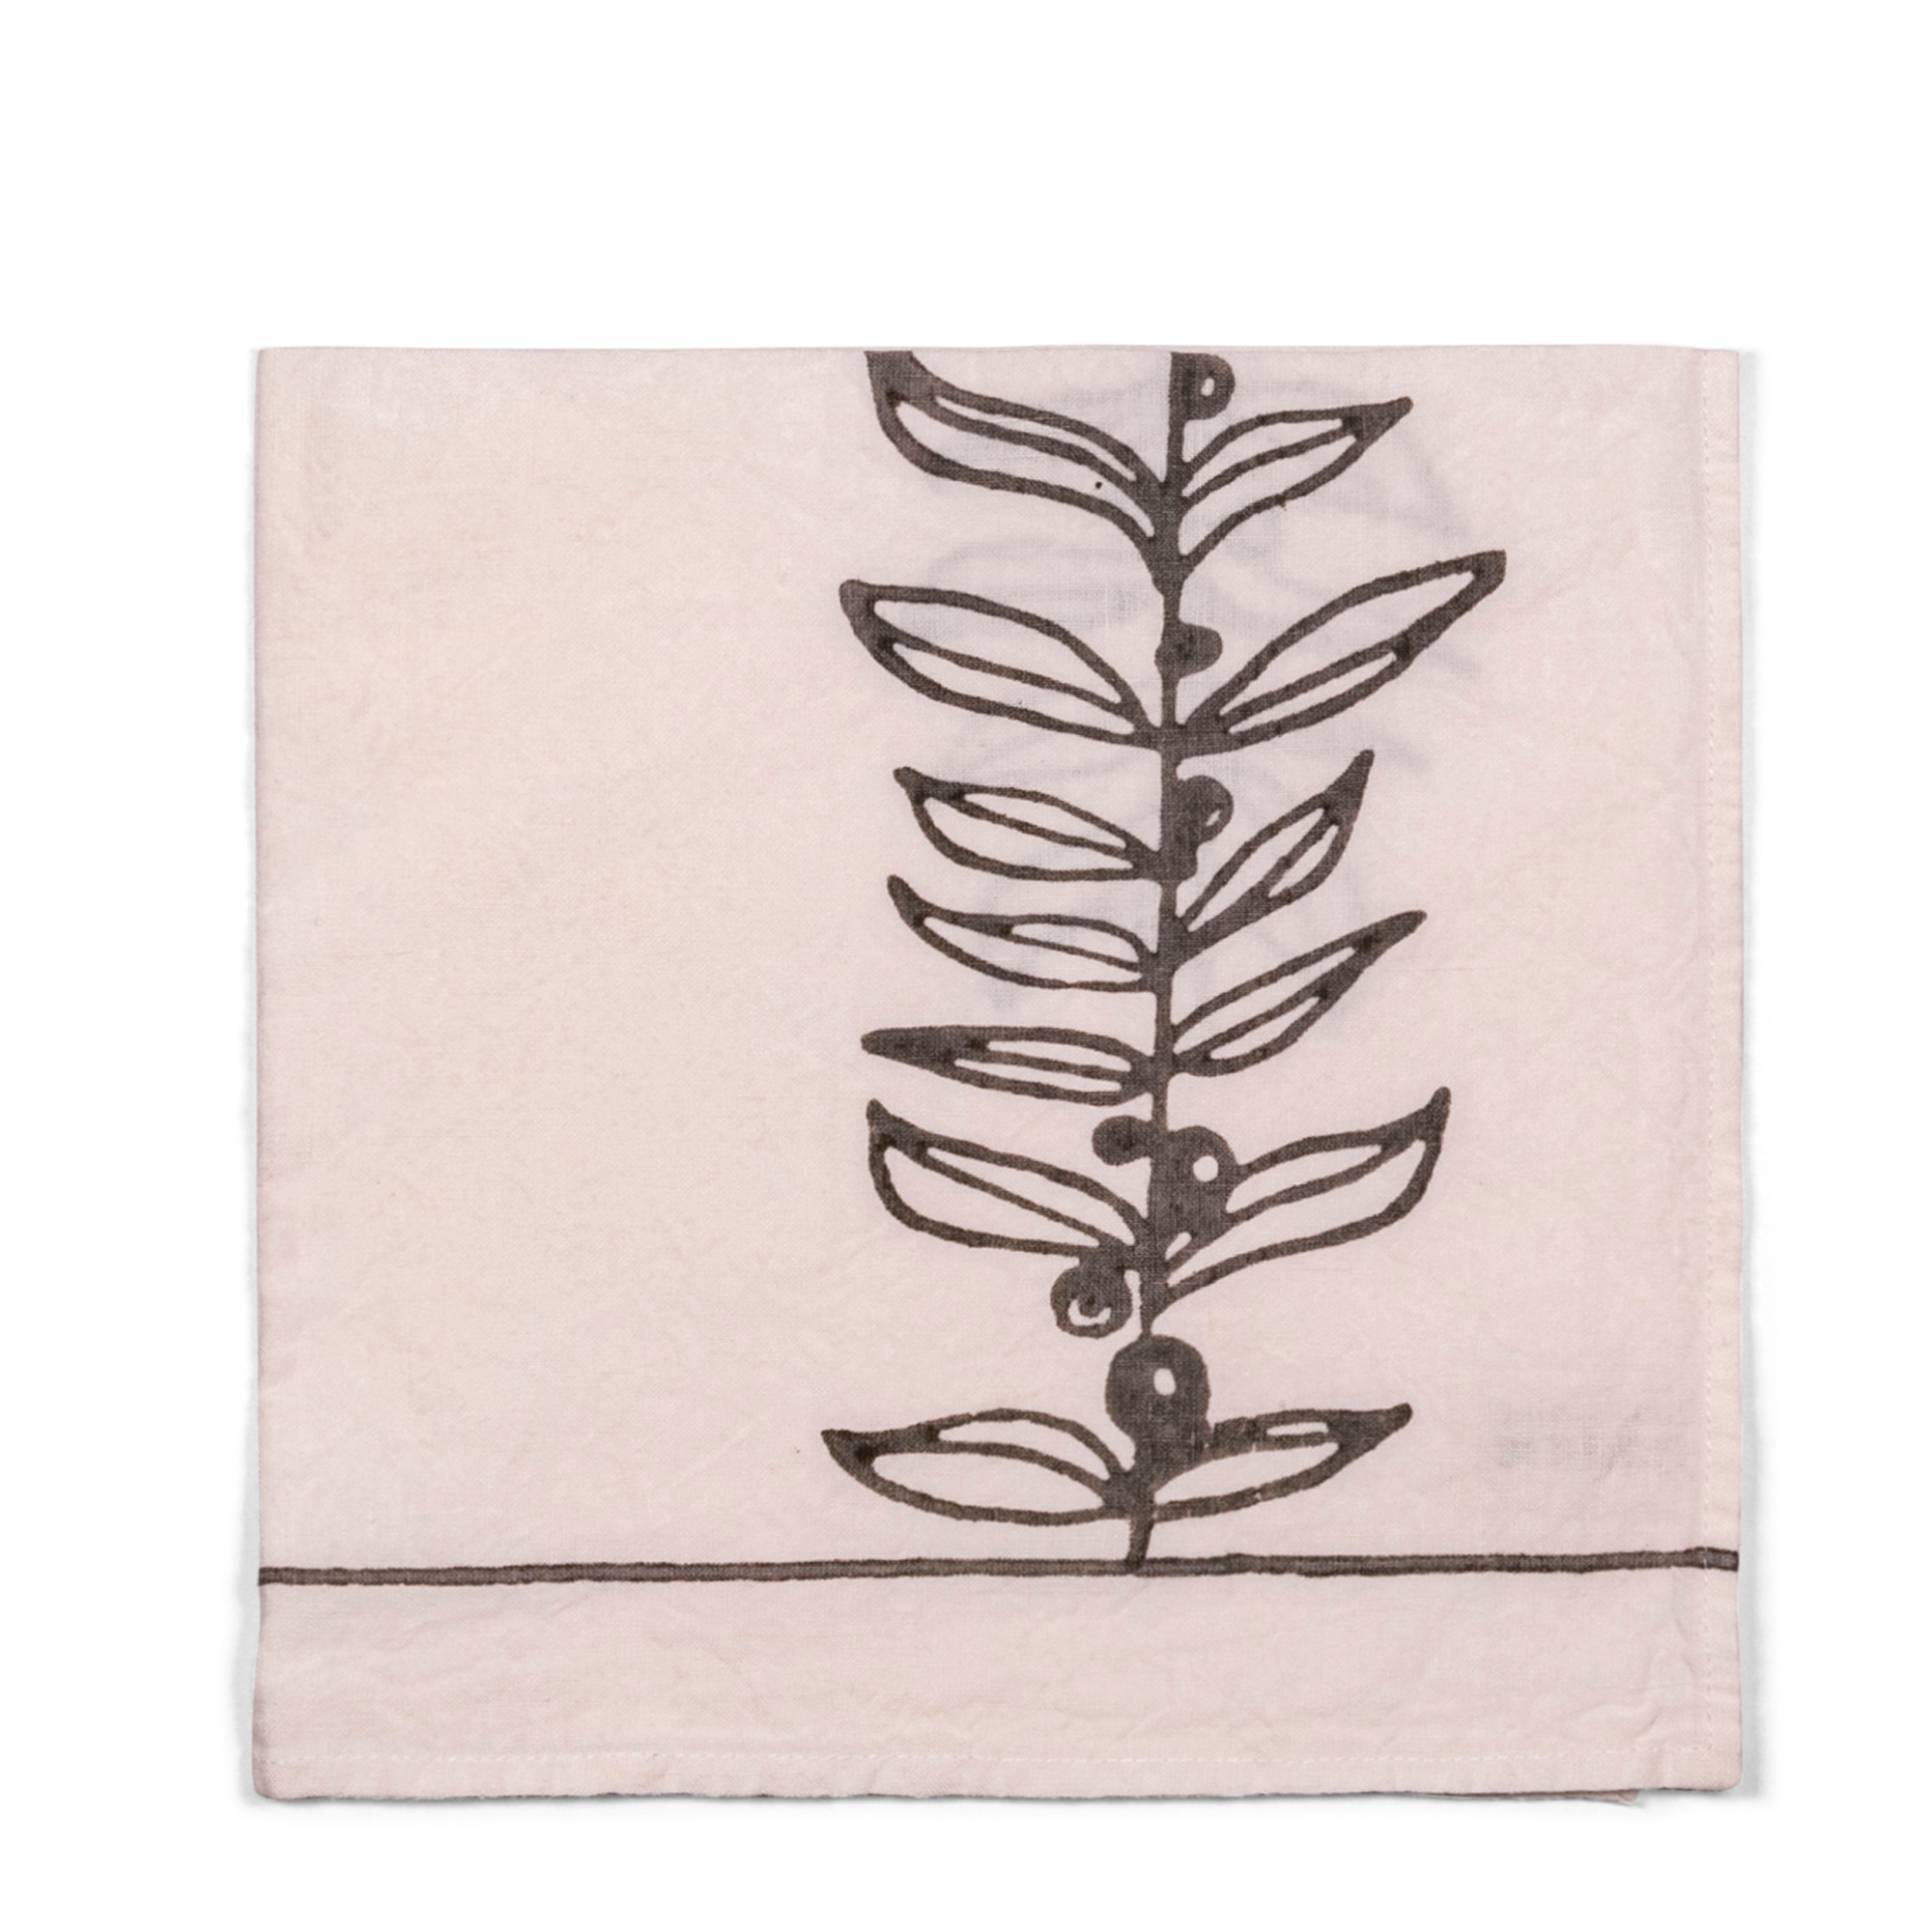 A 100% linen napkin in natural color, with an illustration of a grey tree. Perfect for breakfast, formal dining, or a garden tablescape.